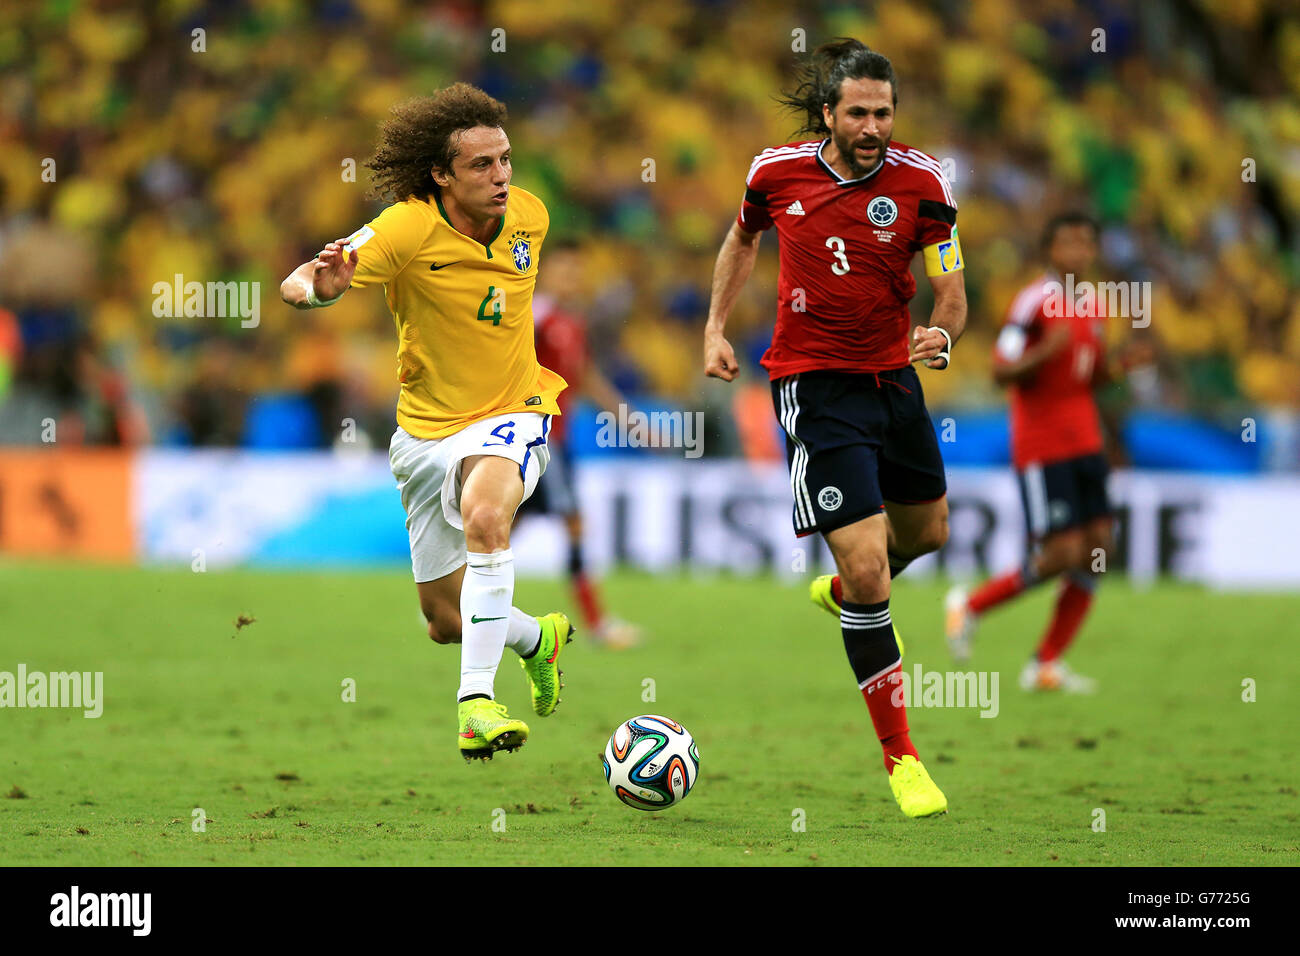 Soccer - FIFA World Cup 2014 - Quarter Final - Brazil v Colombia - Estadio Castelao. Brazil's David Luiz battles for the ball with Colombia's Carlos Valdes Stock Photo